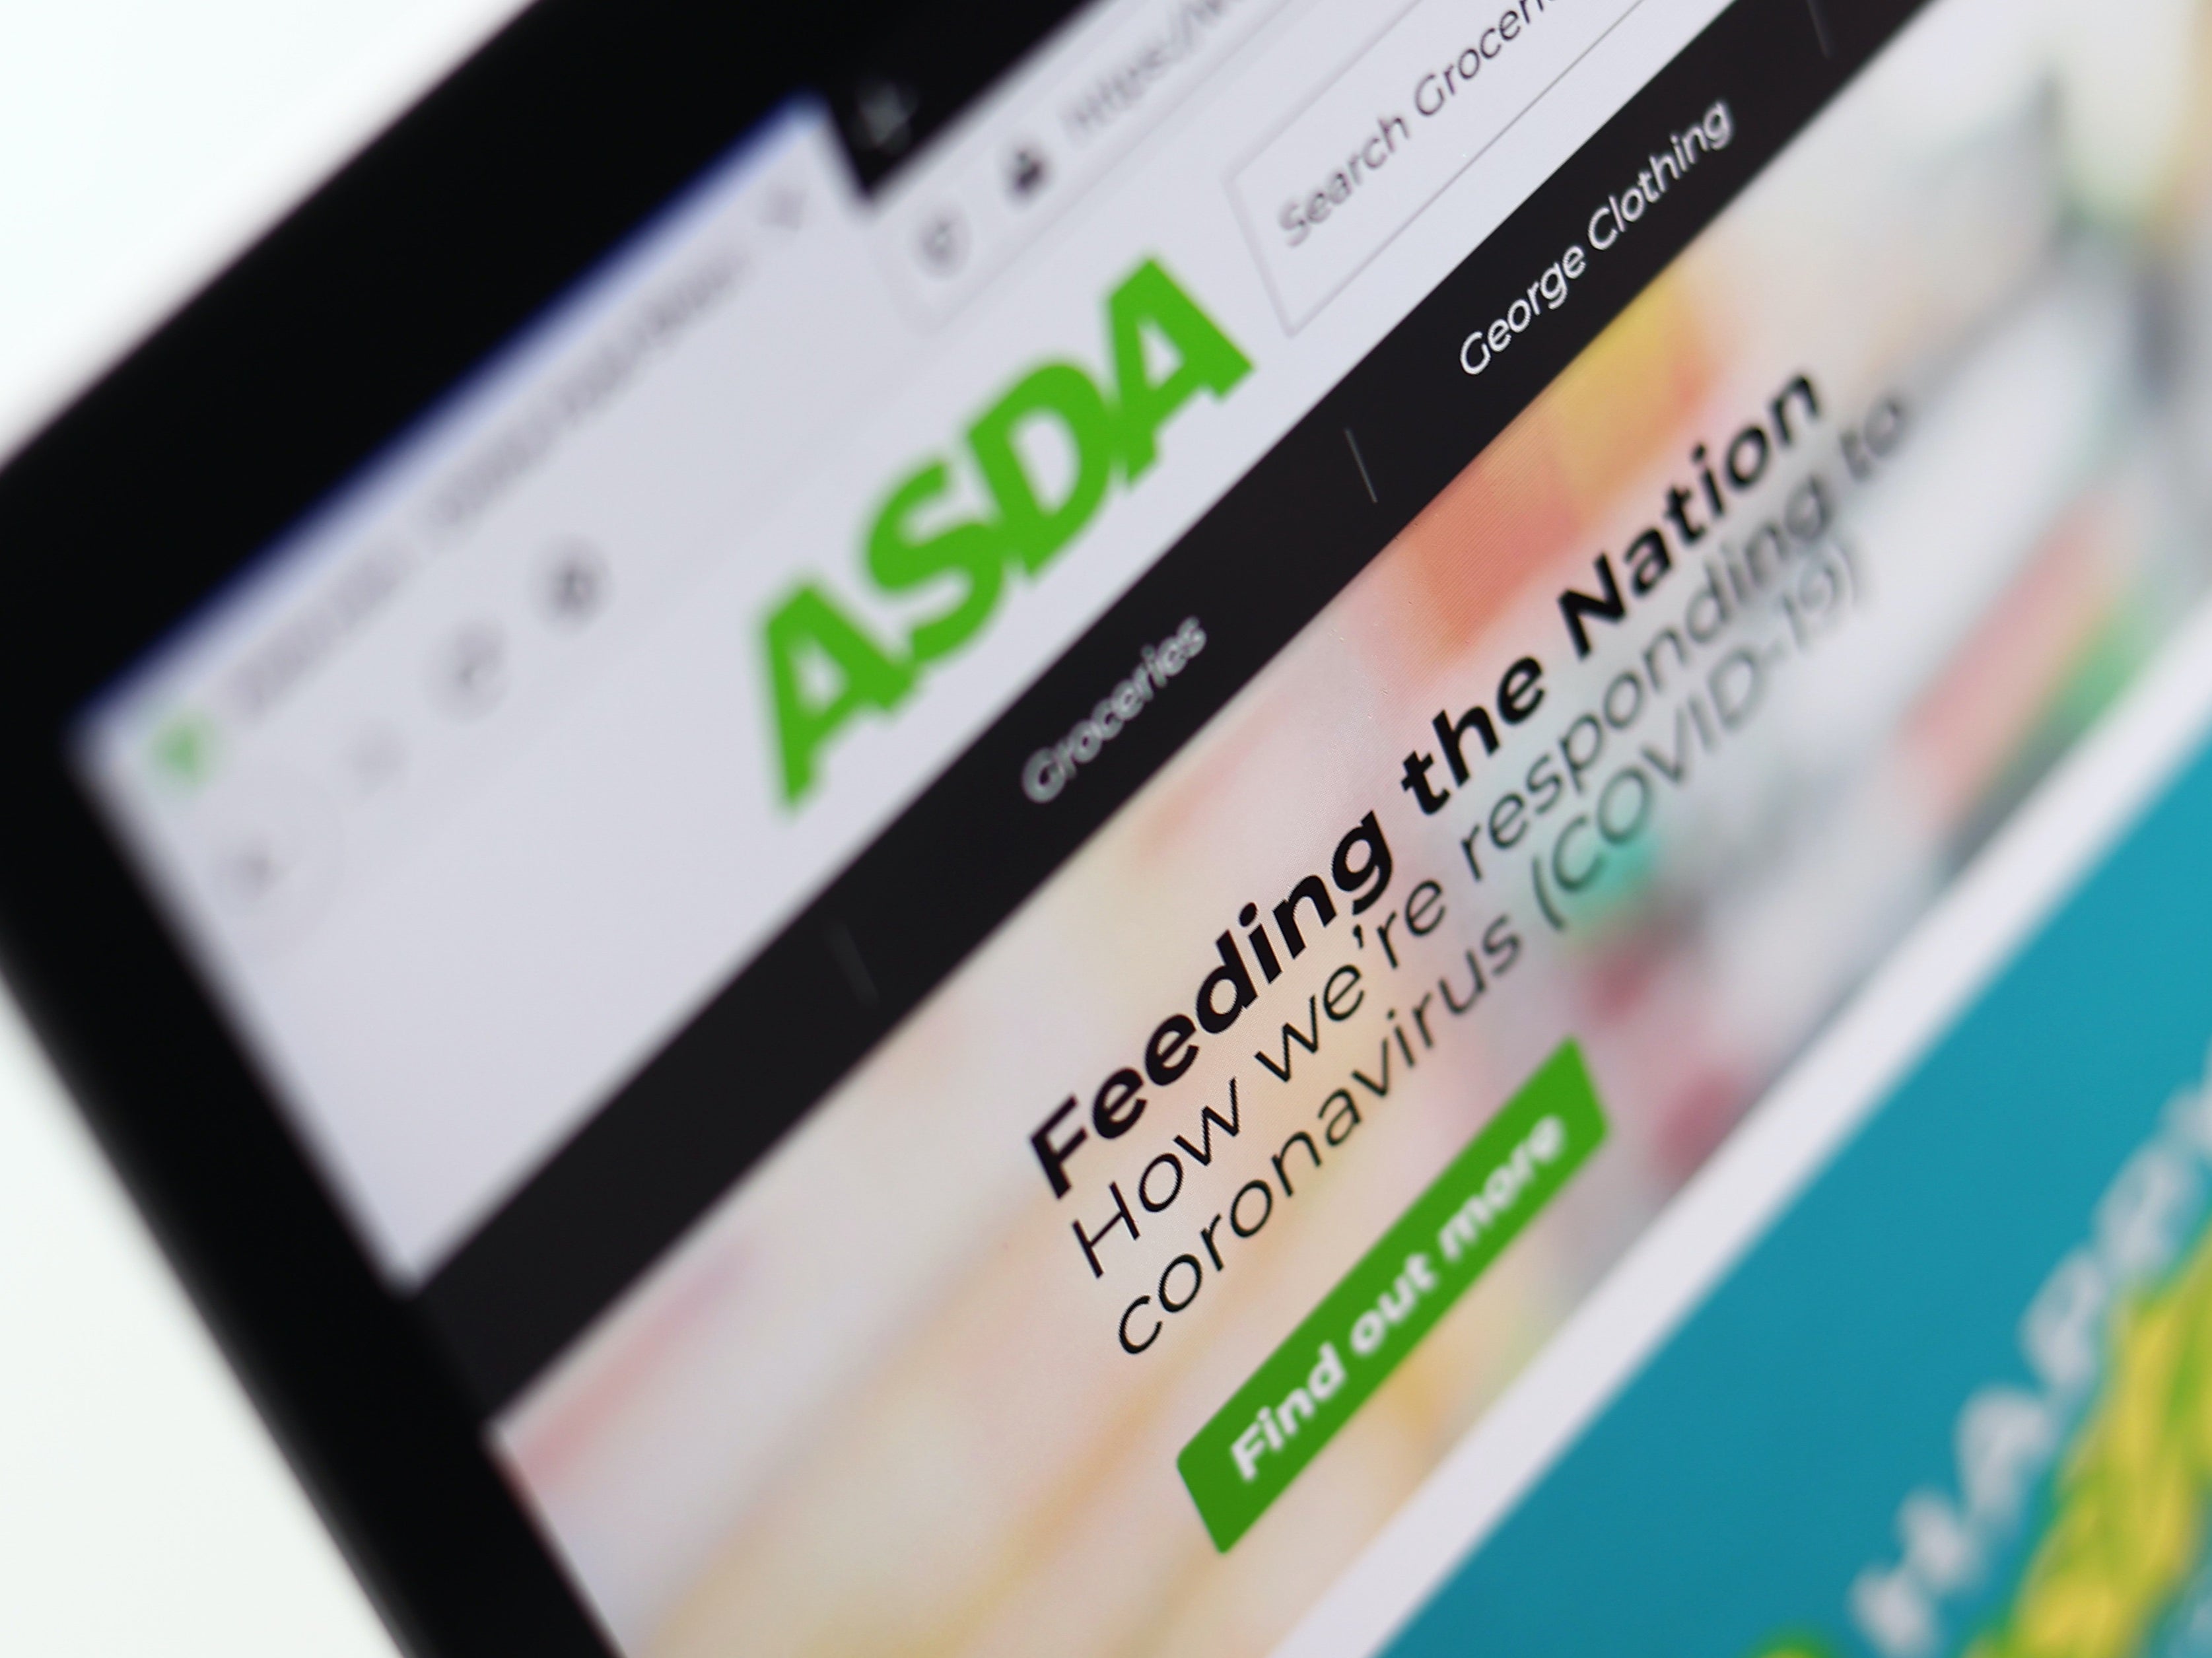 Asda could face a multi-million pound bill if the claimants are successful in the end